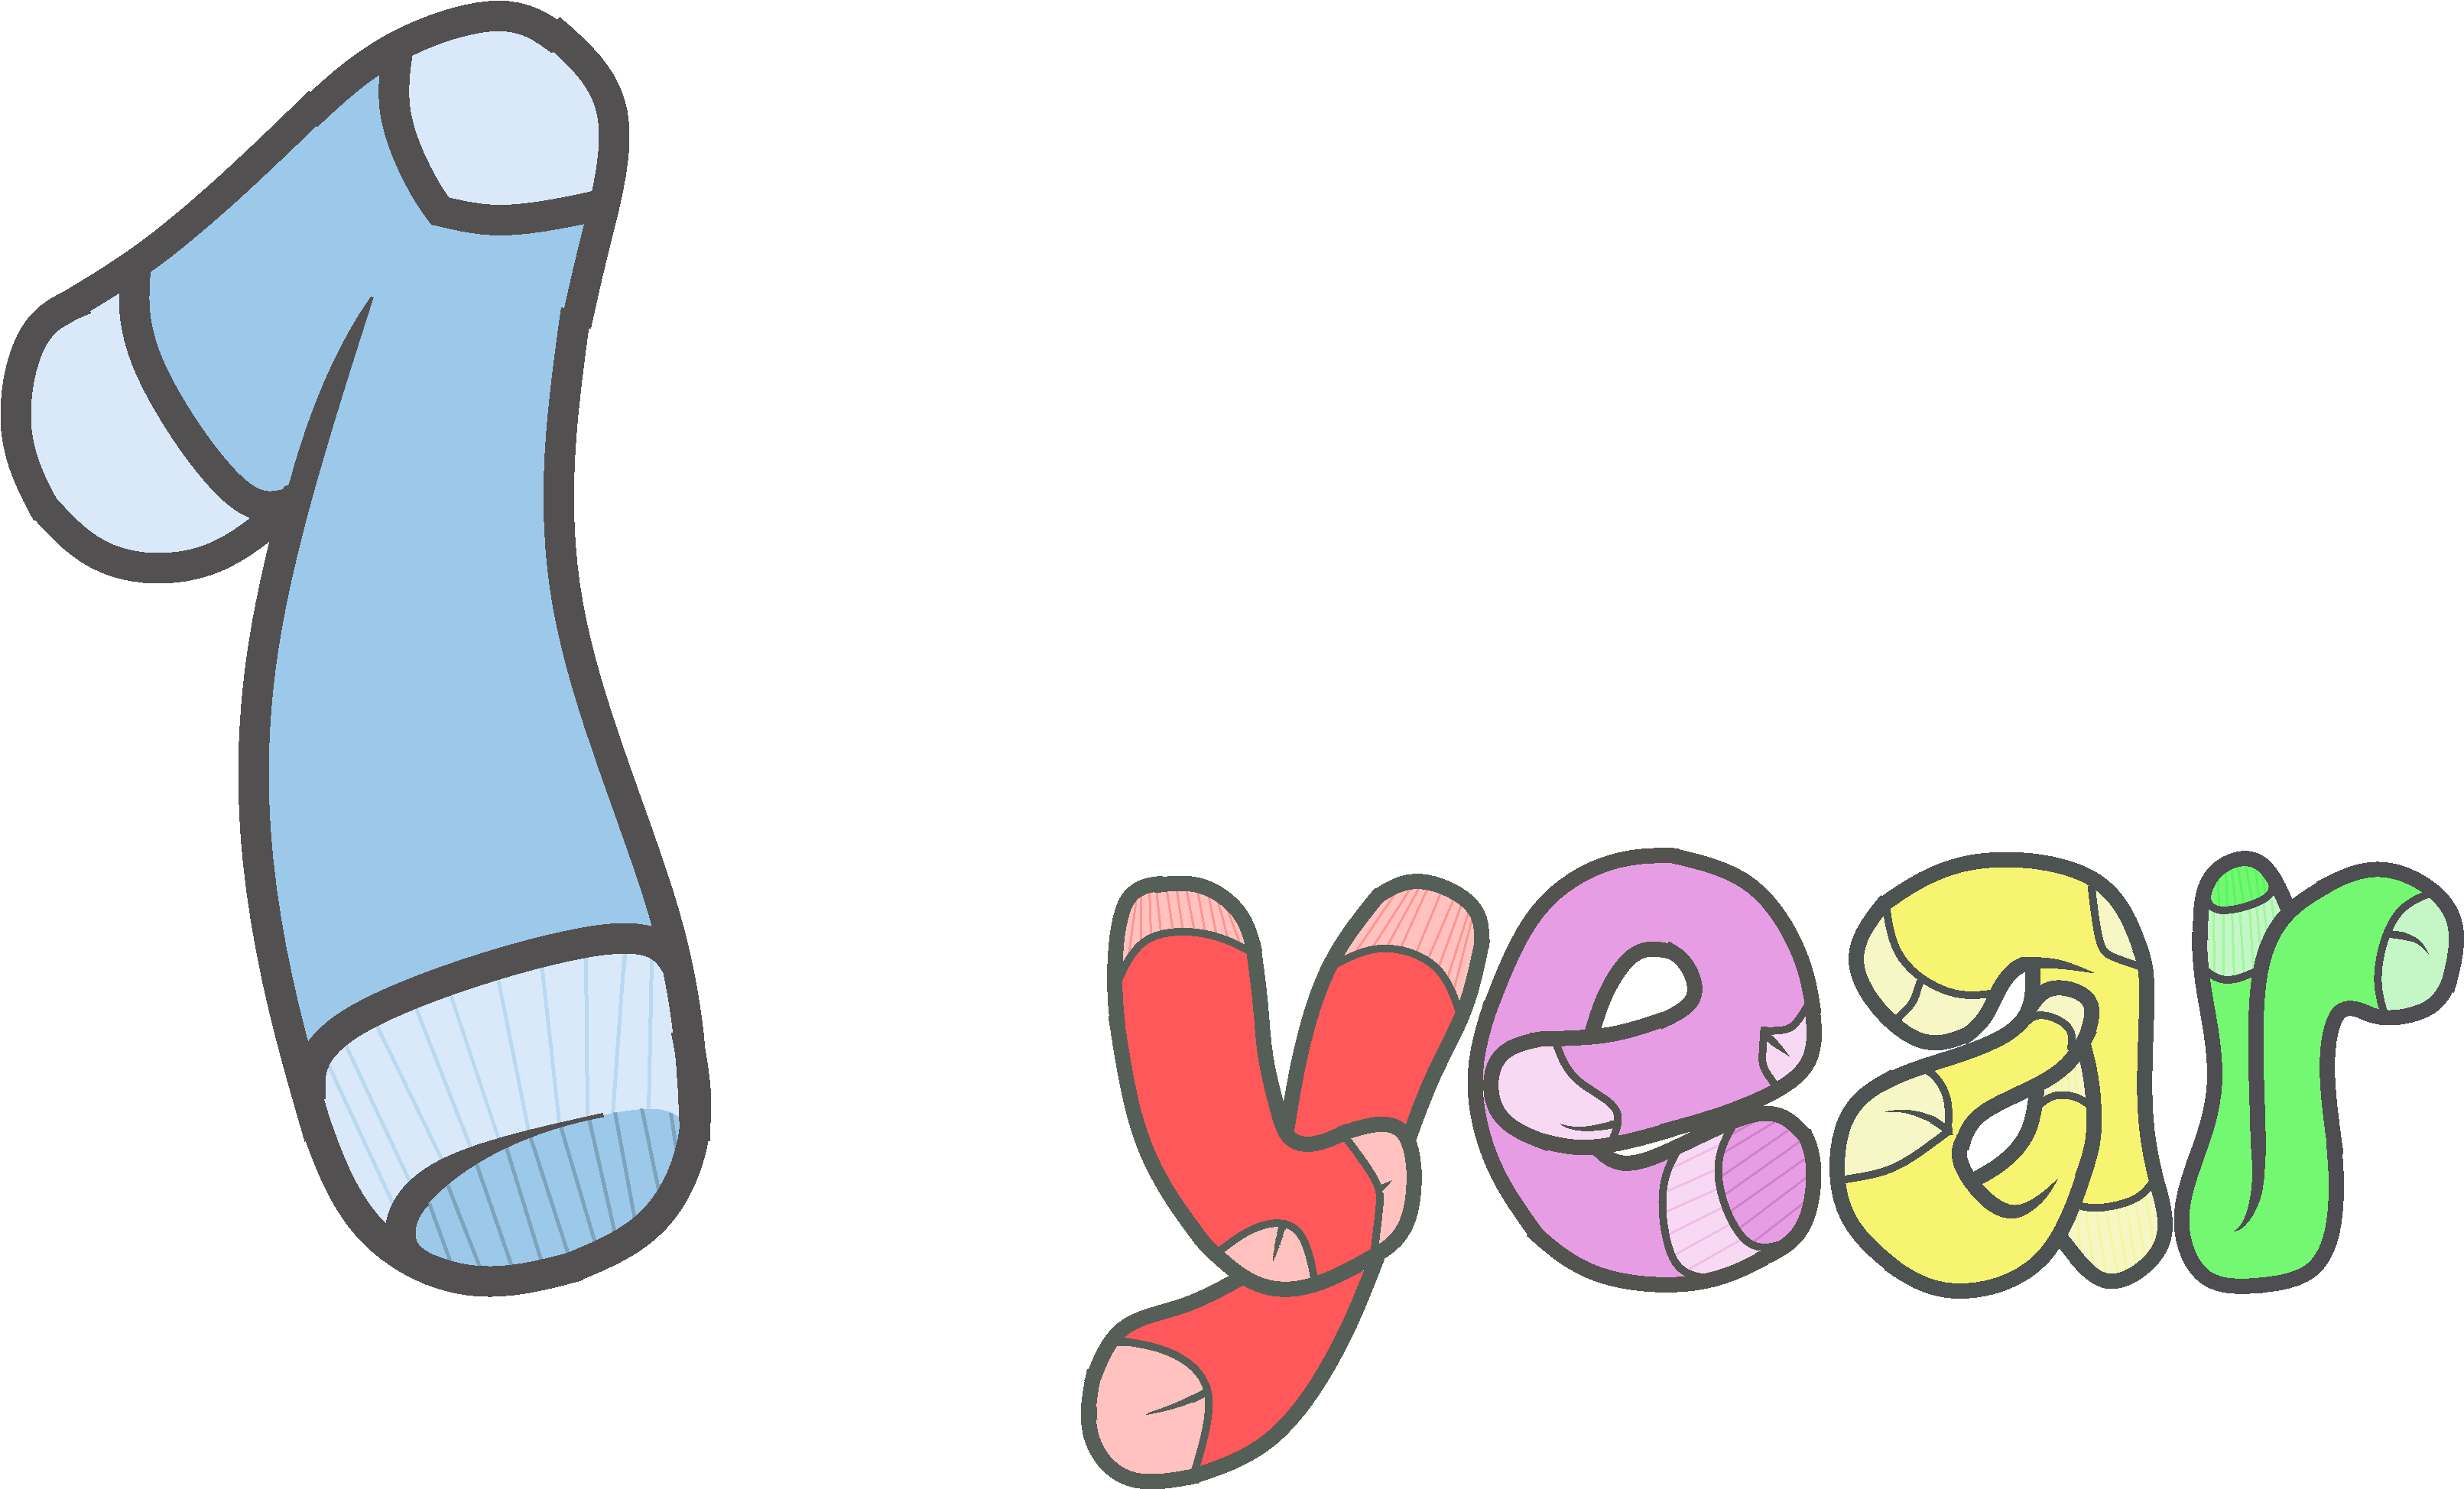 Today Magical Tights, Socks And Leggings Peppy Woolton - Today Magical Tights, Socks And Leggings Peppy Woolton (3840x3840)